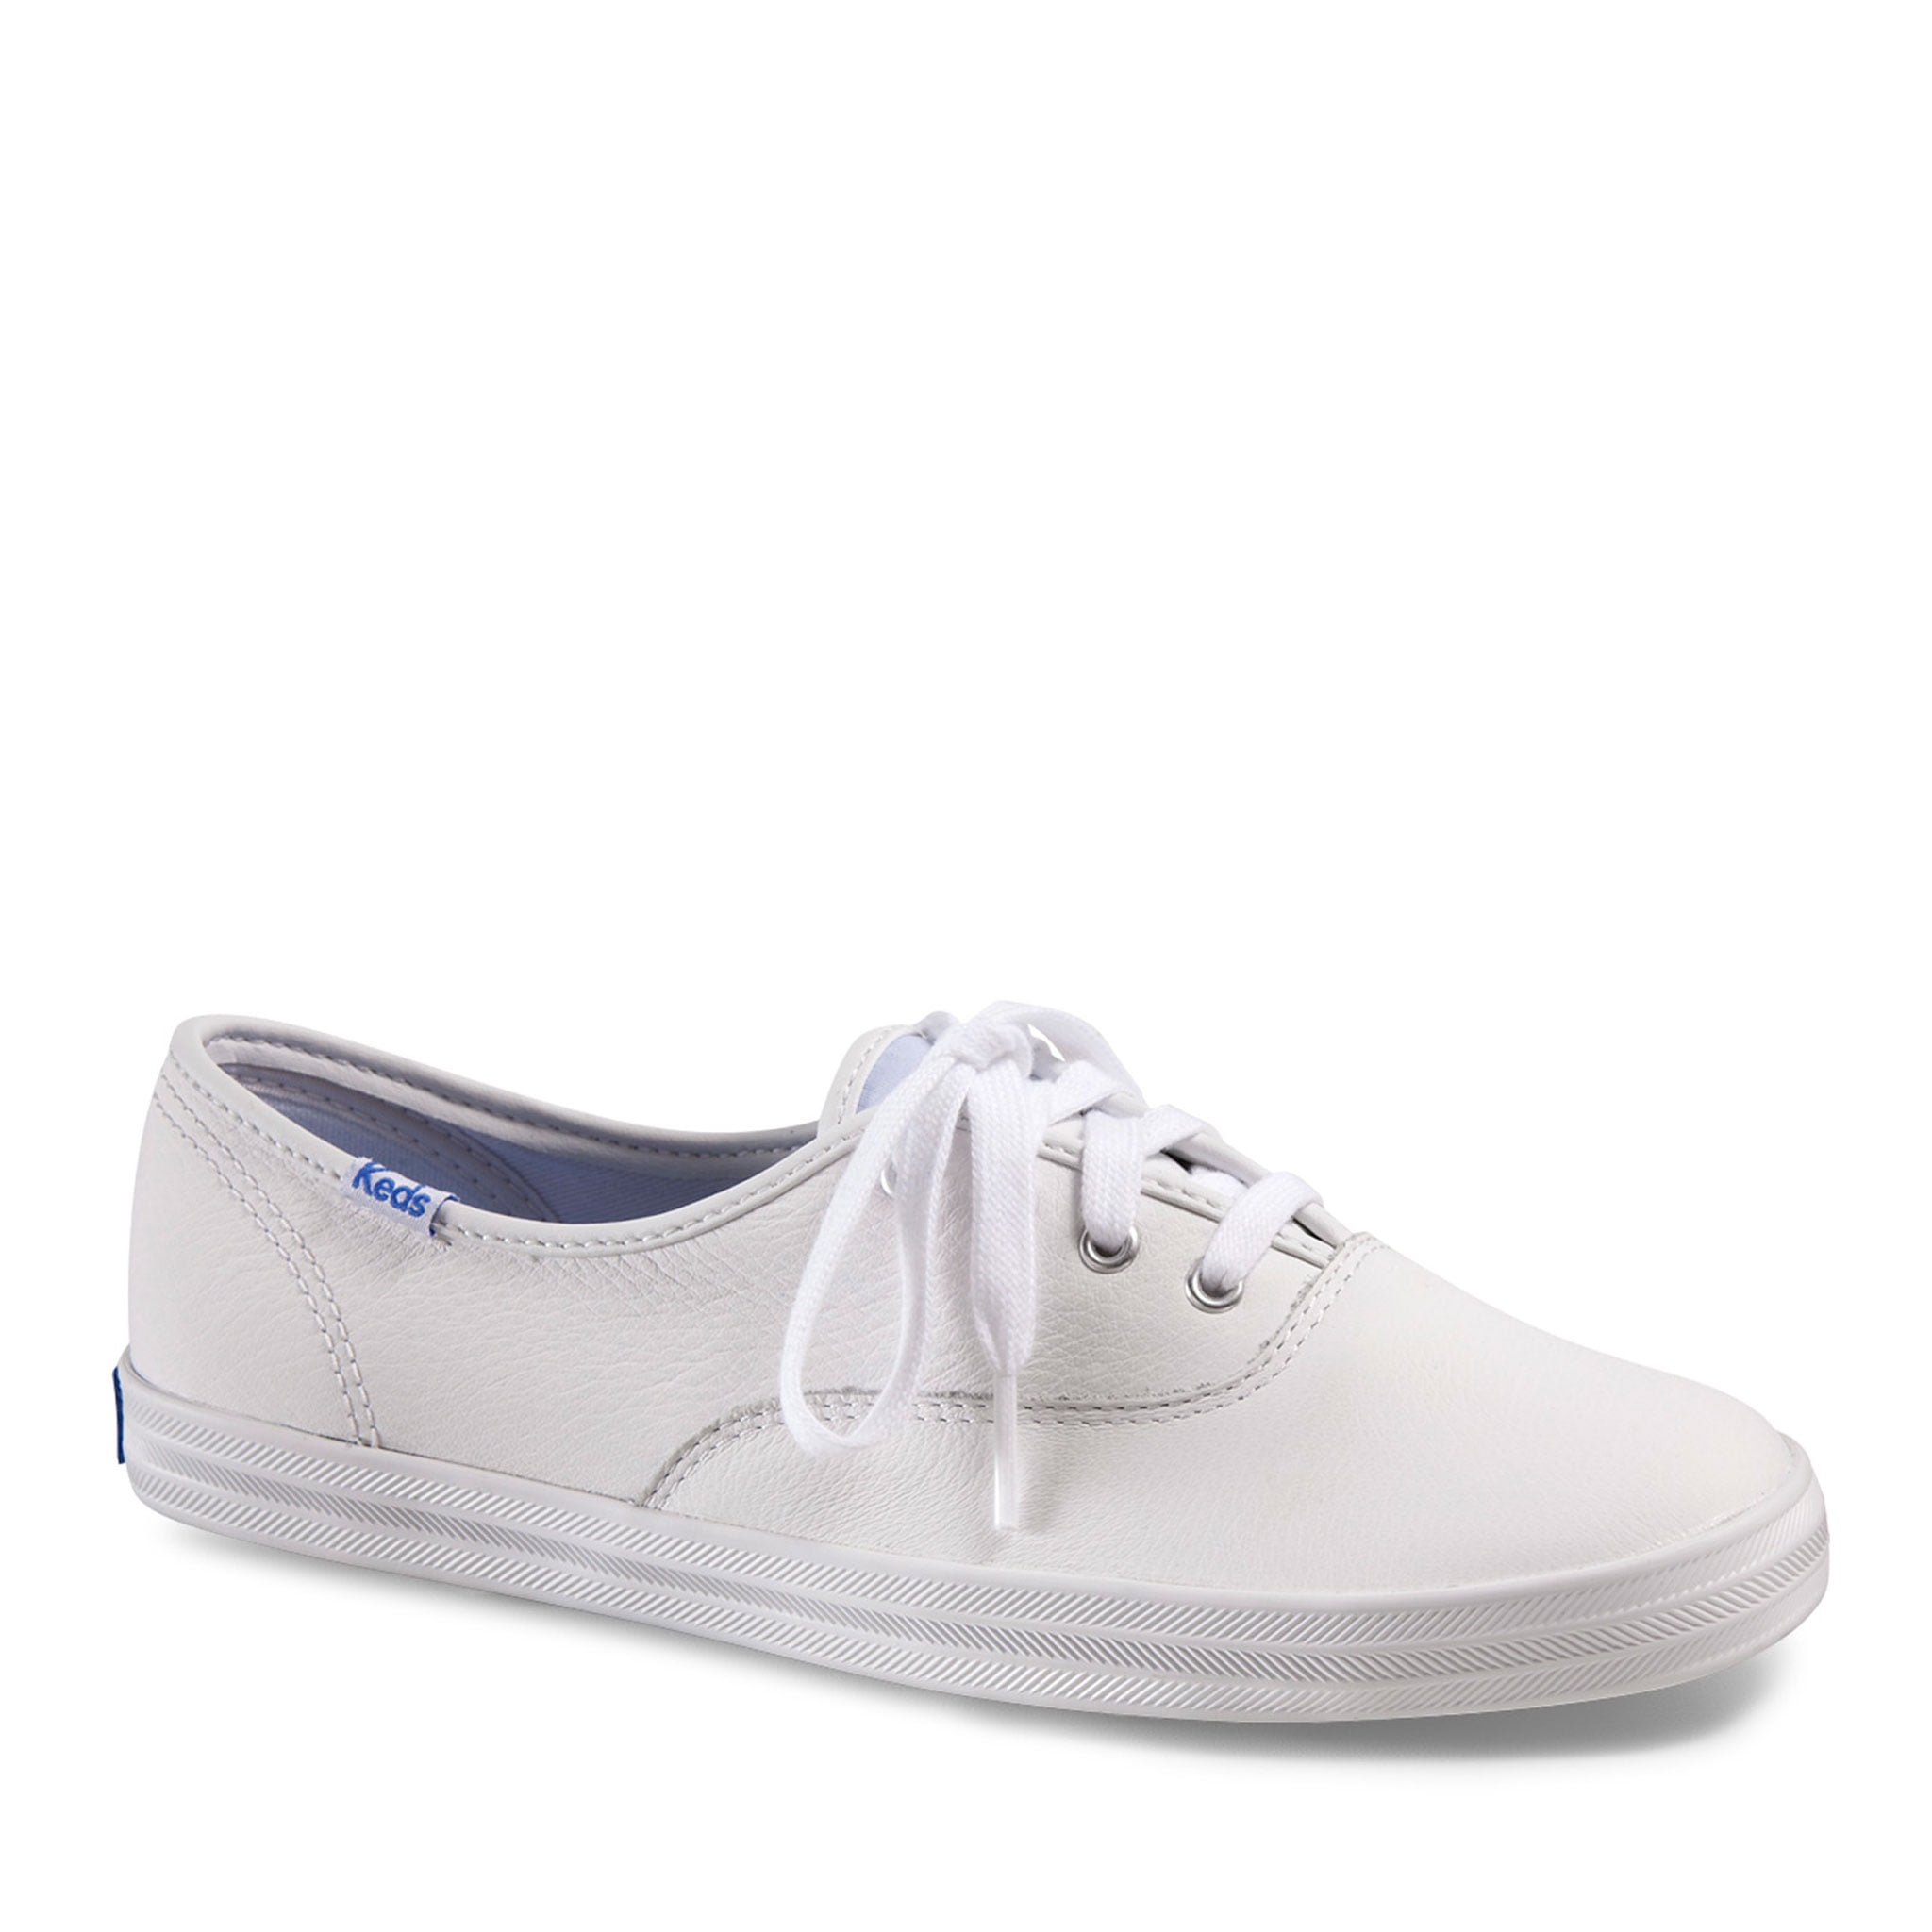 Keds Women's Champion Leather Oxford Shoe in White, 6.5 US | Walmart Canada